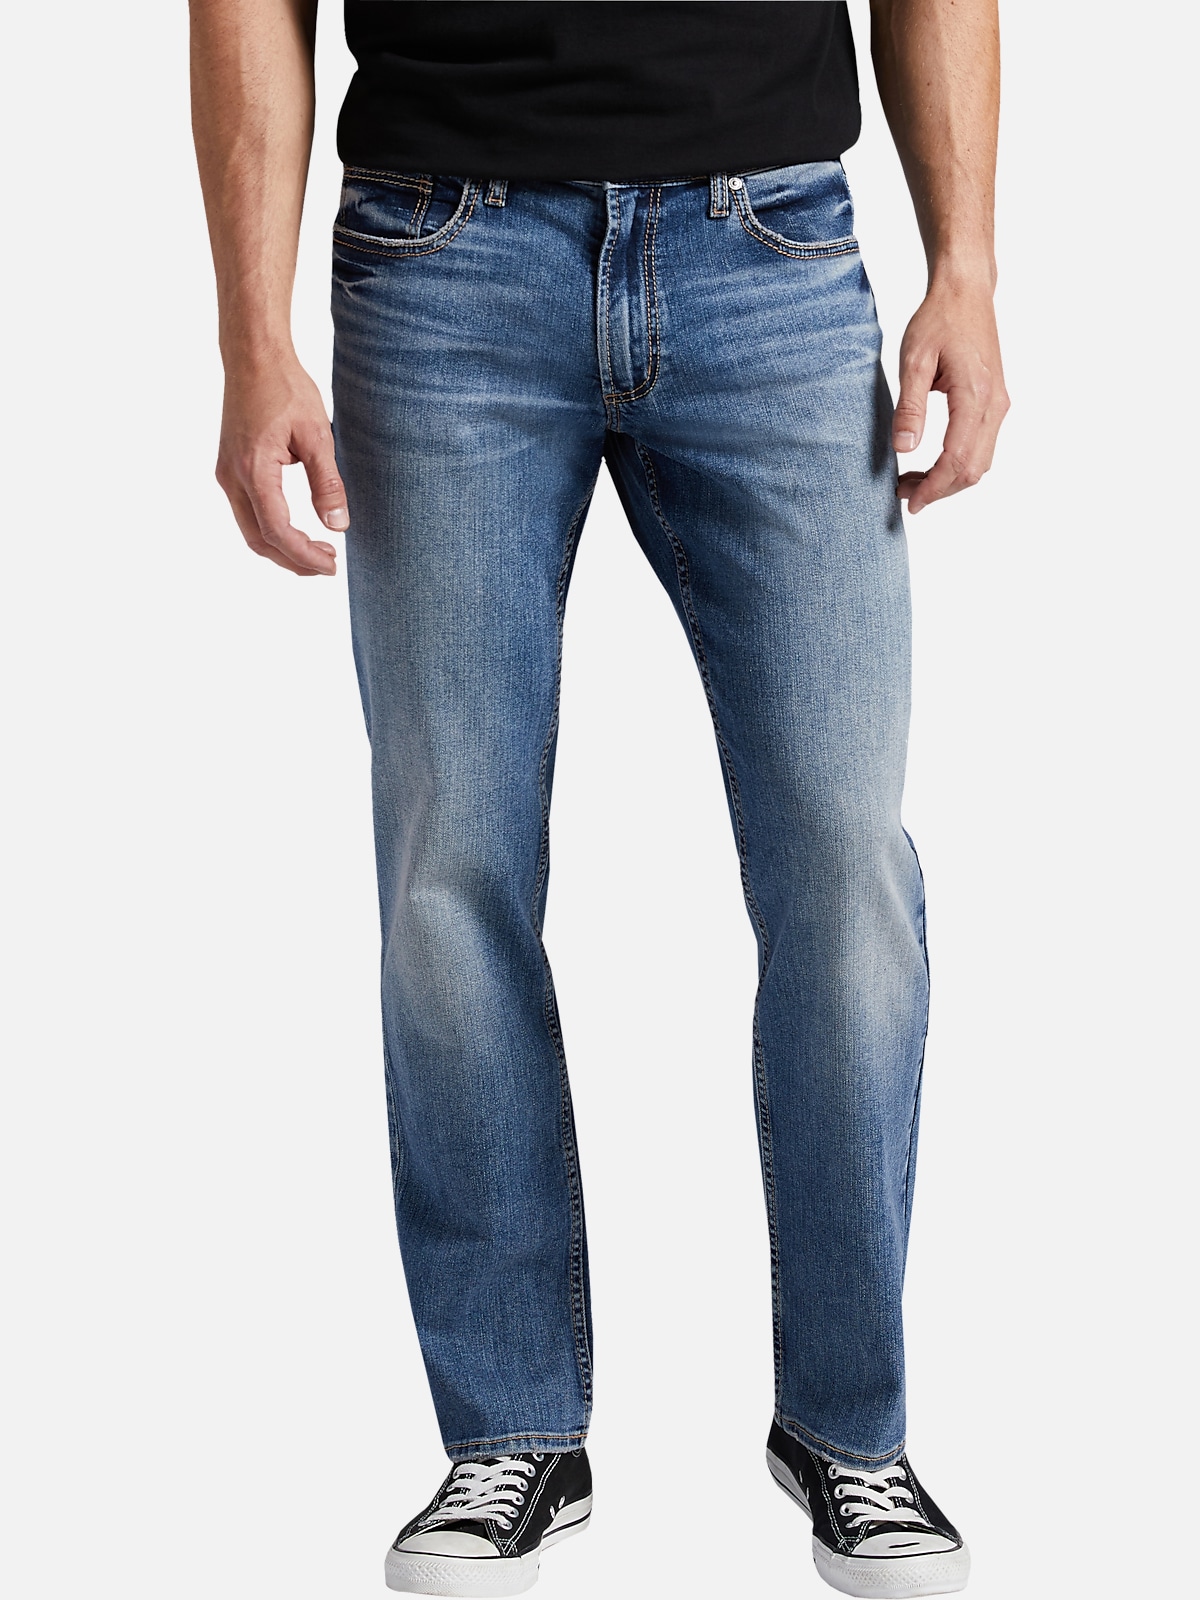 Silver Jeans Allan Slim Fit Straight Leg Jeans | All Clearance $39.99 ...